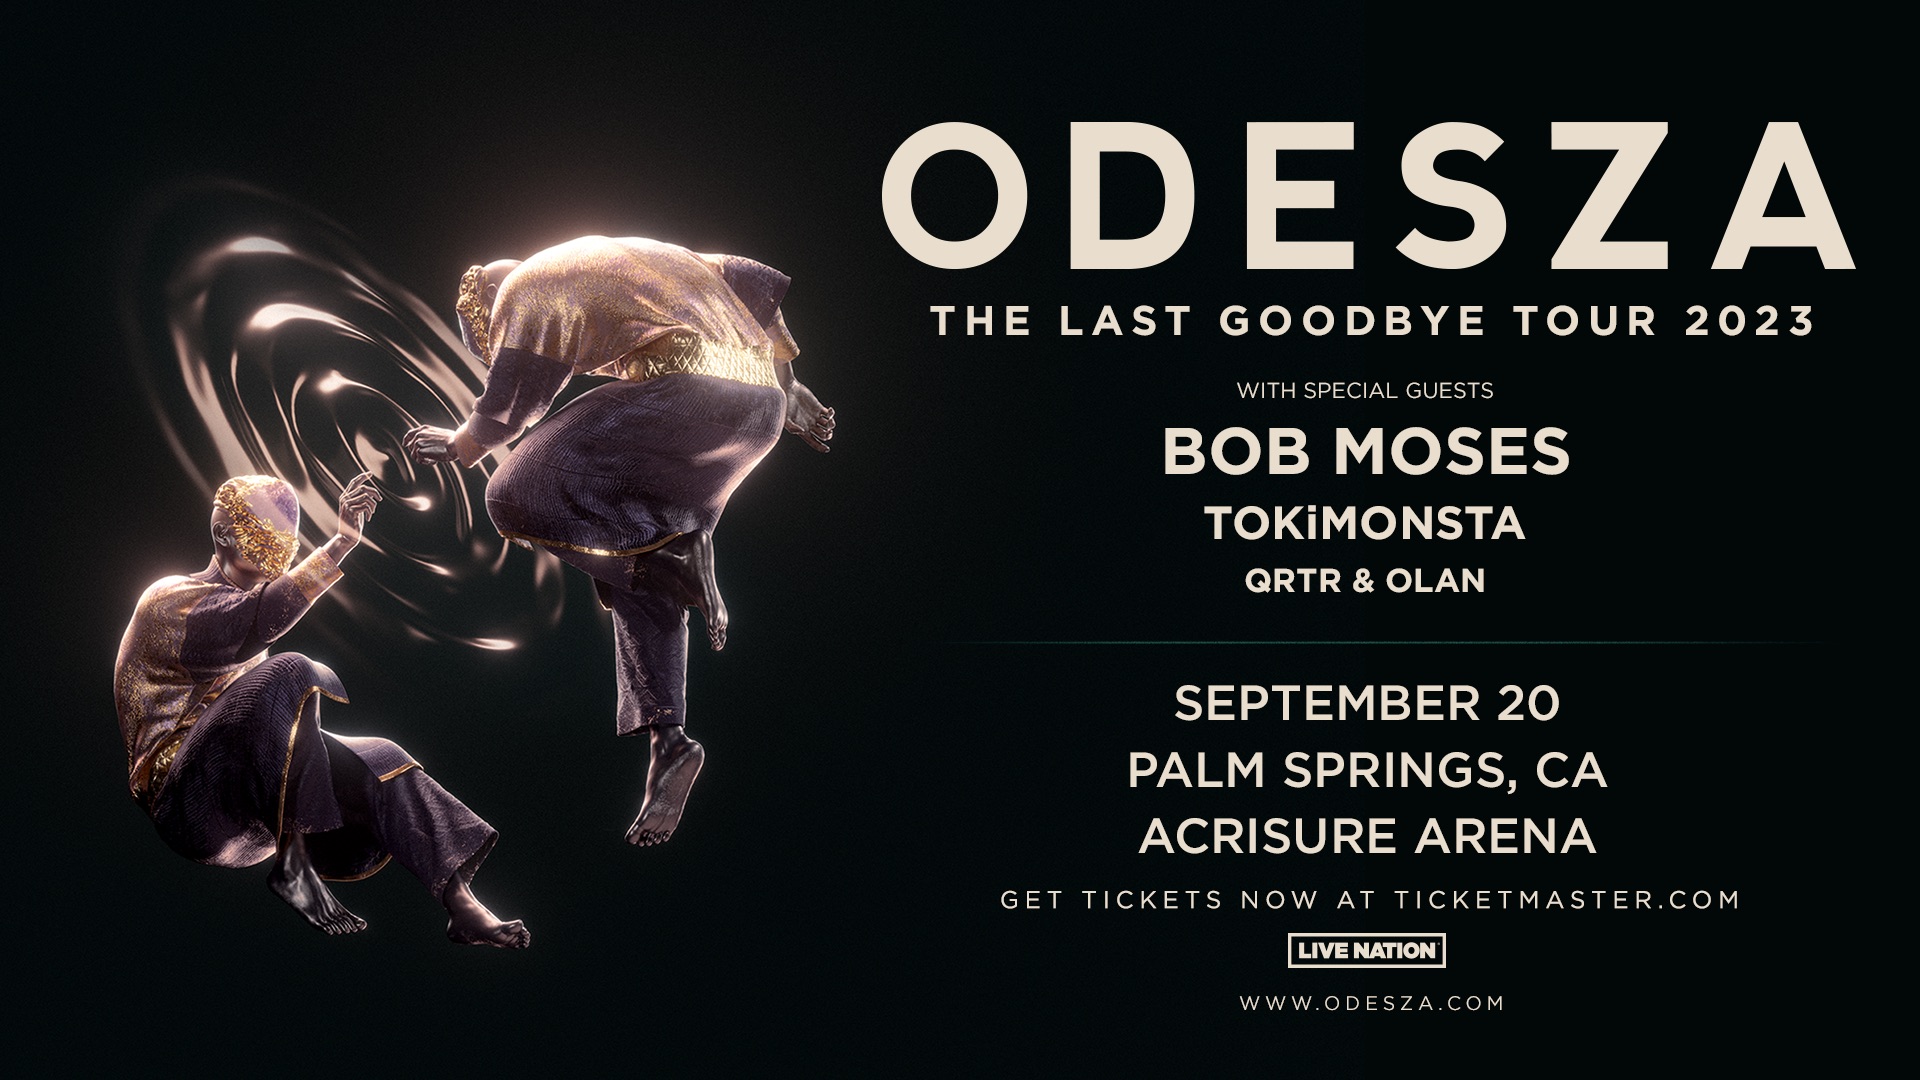 ODESZA Brings “The Last Goodbye” Tour to Acrisure Arena September 20